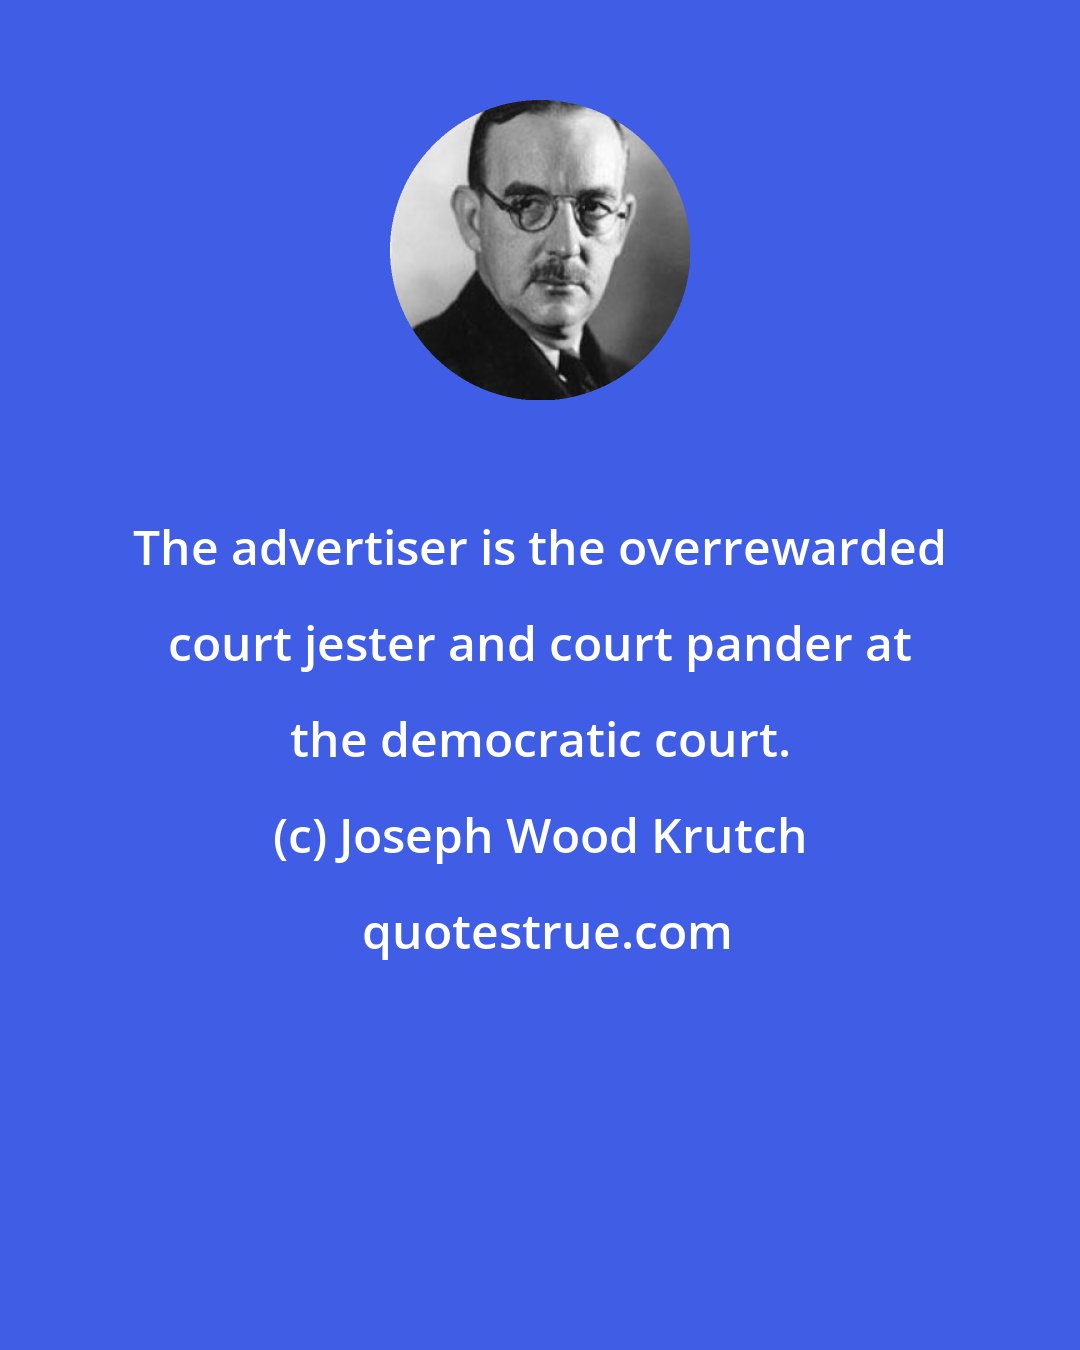 Joseph Wood Krutch: The advertiser is the overrewarded court jester and court pander at the democratic court.